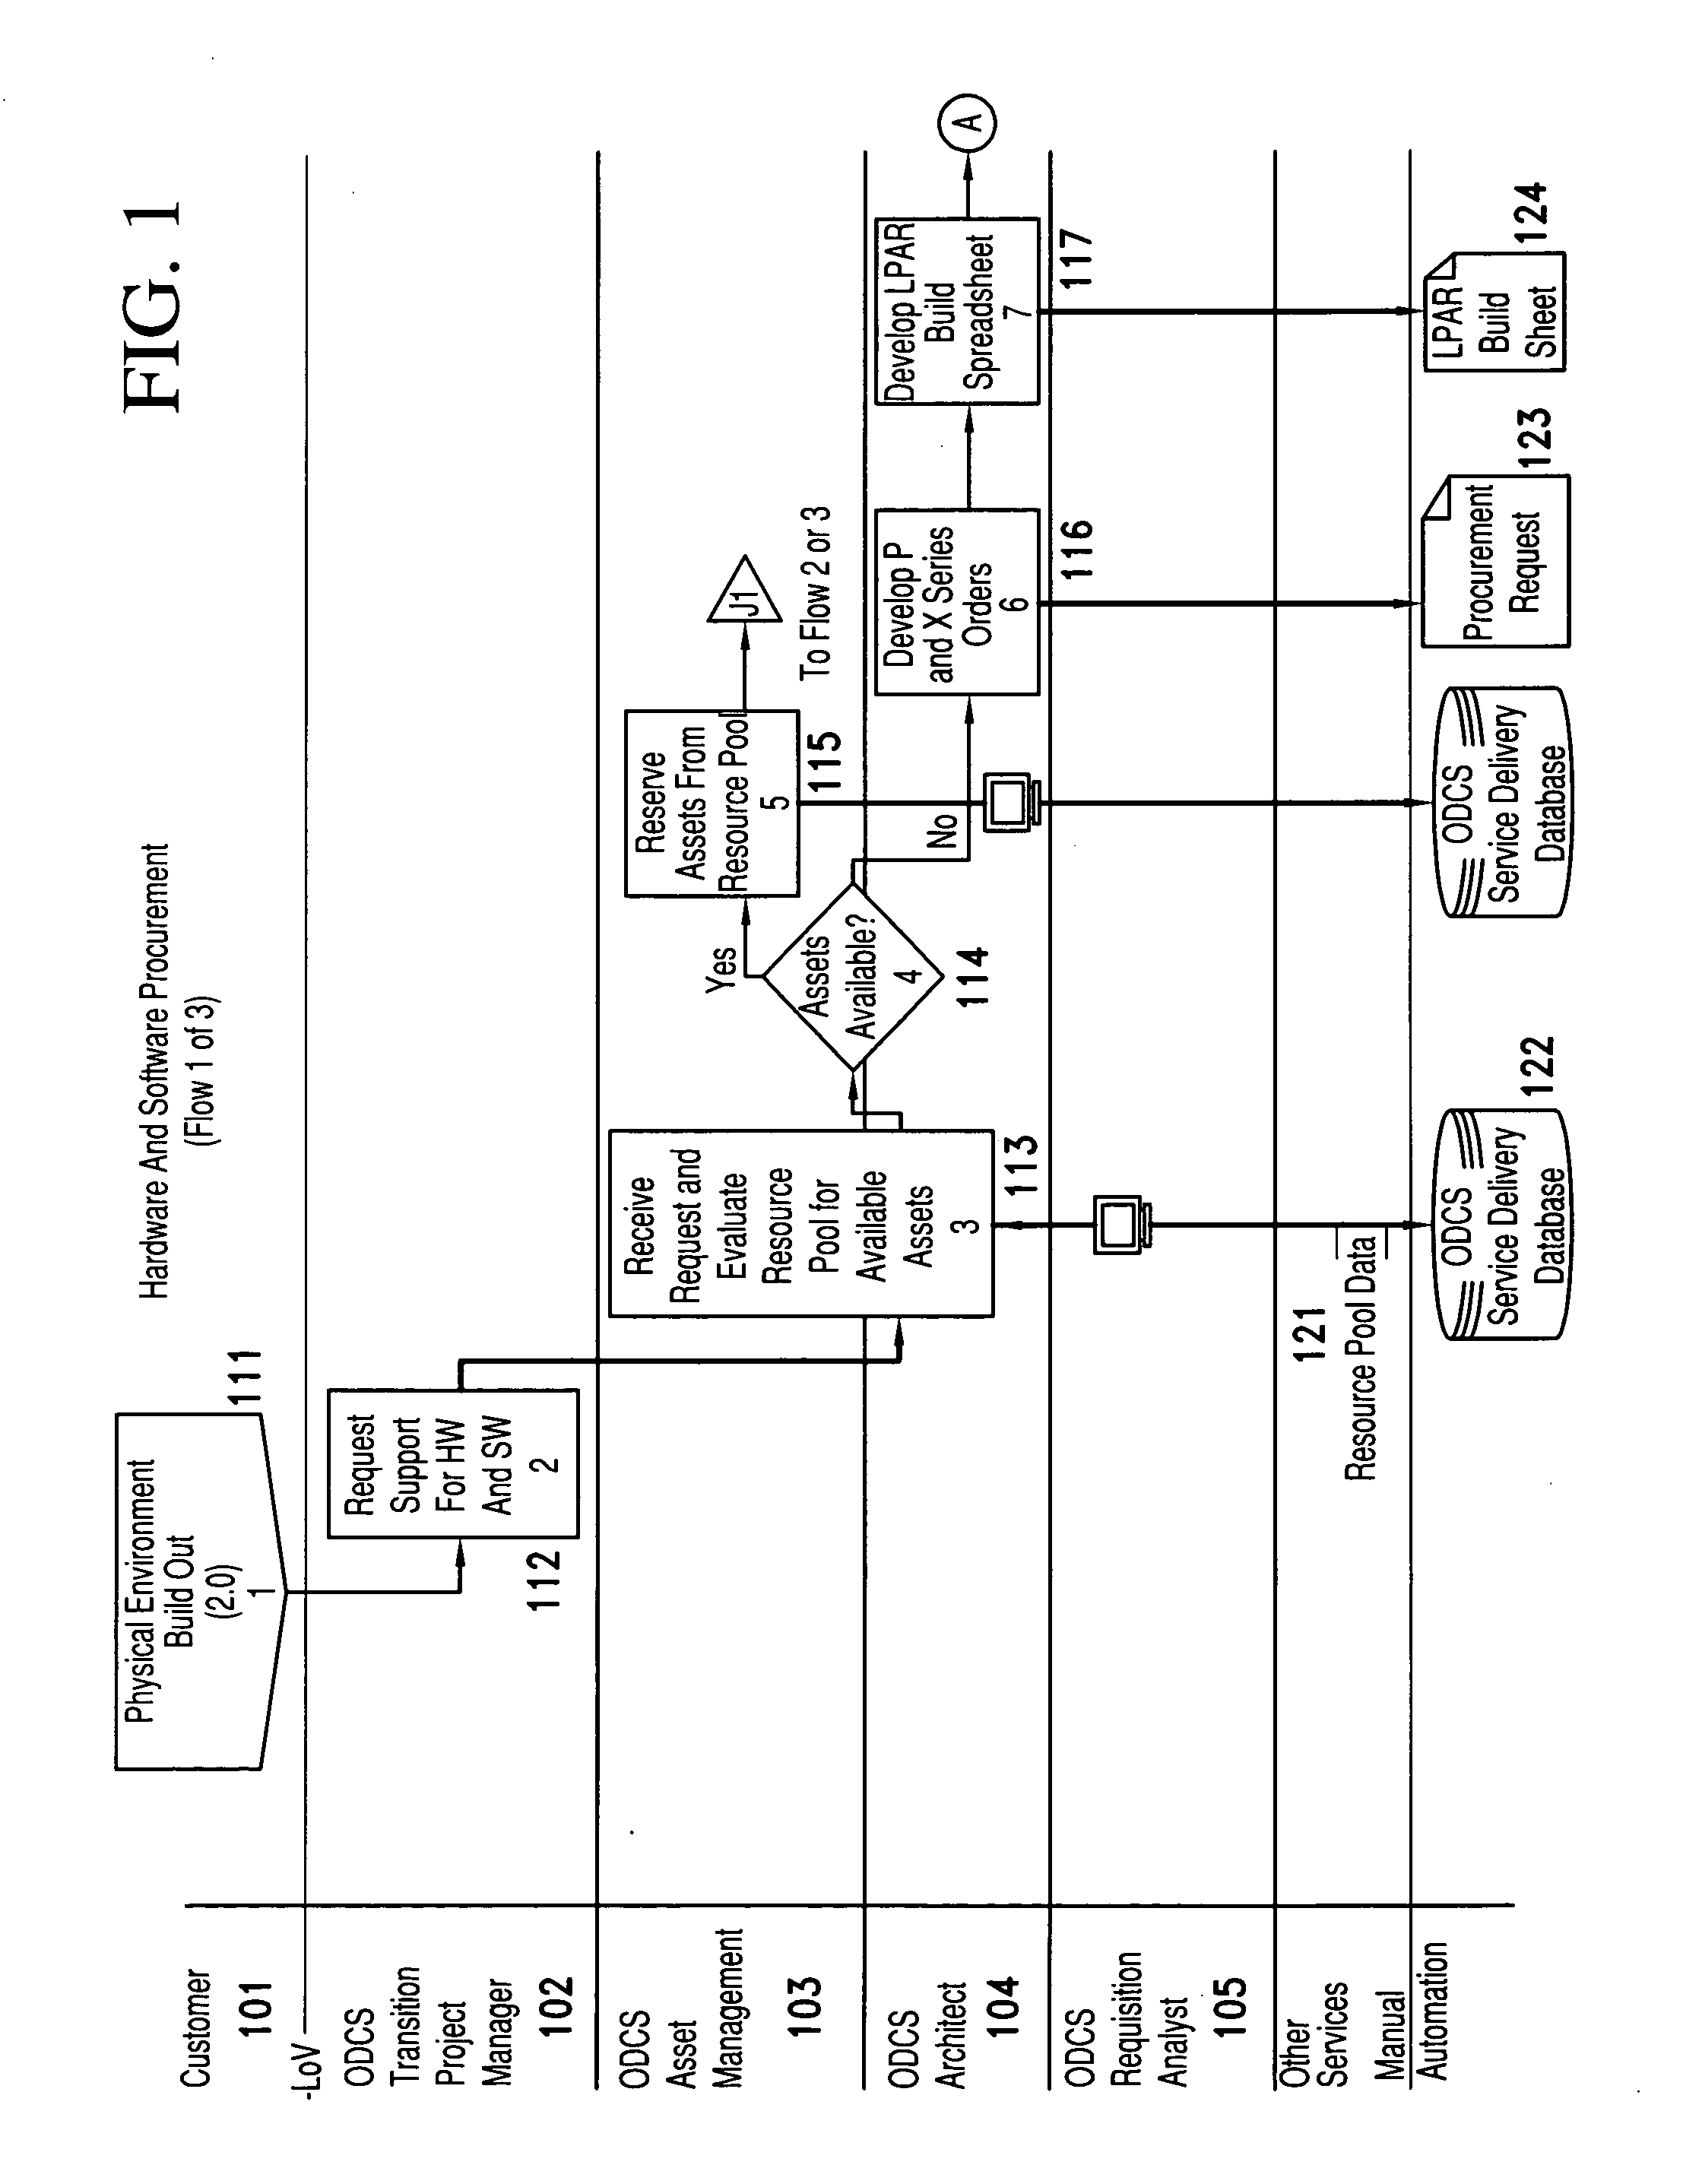 Method and apparatus for quantifying complexity of information